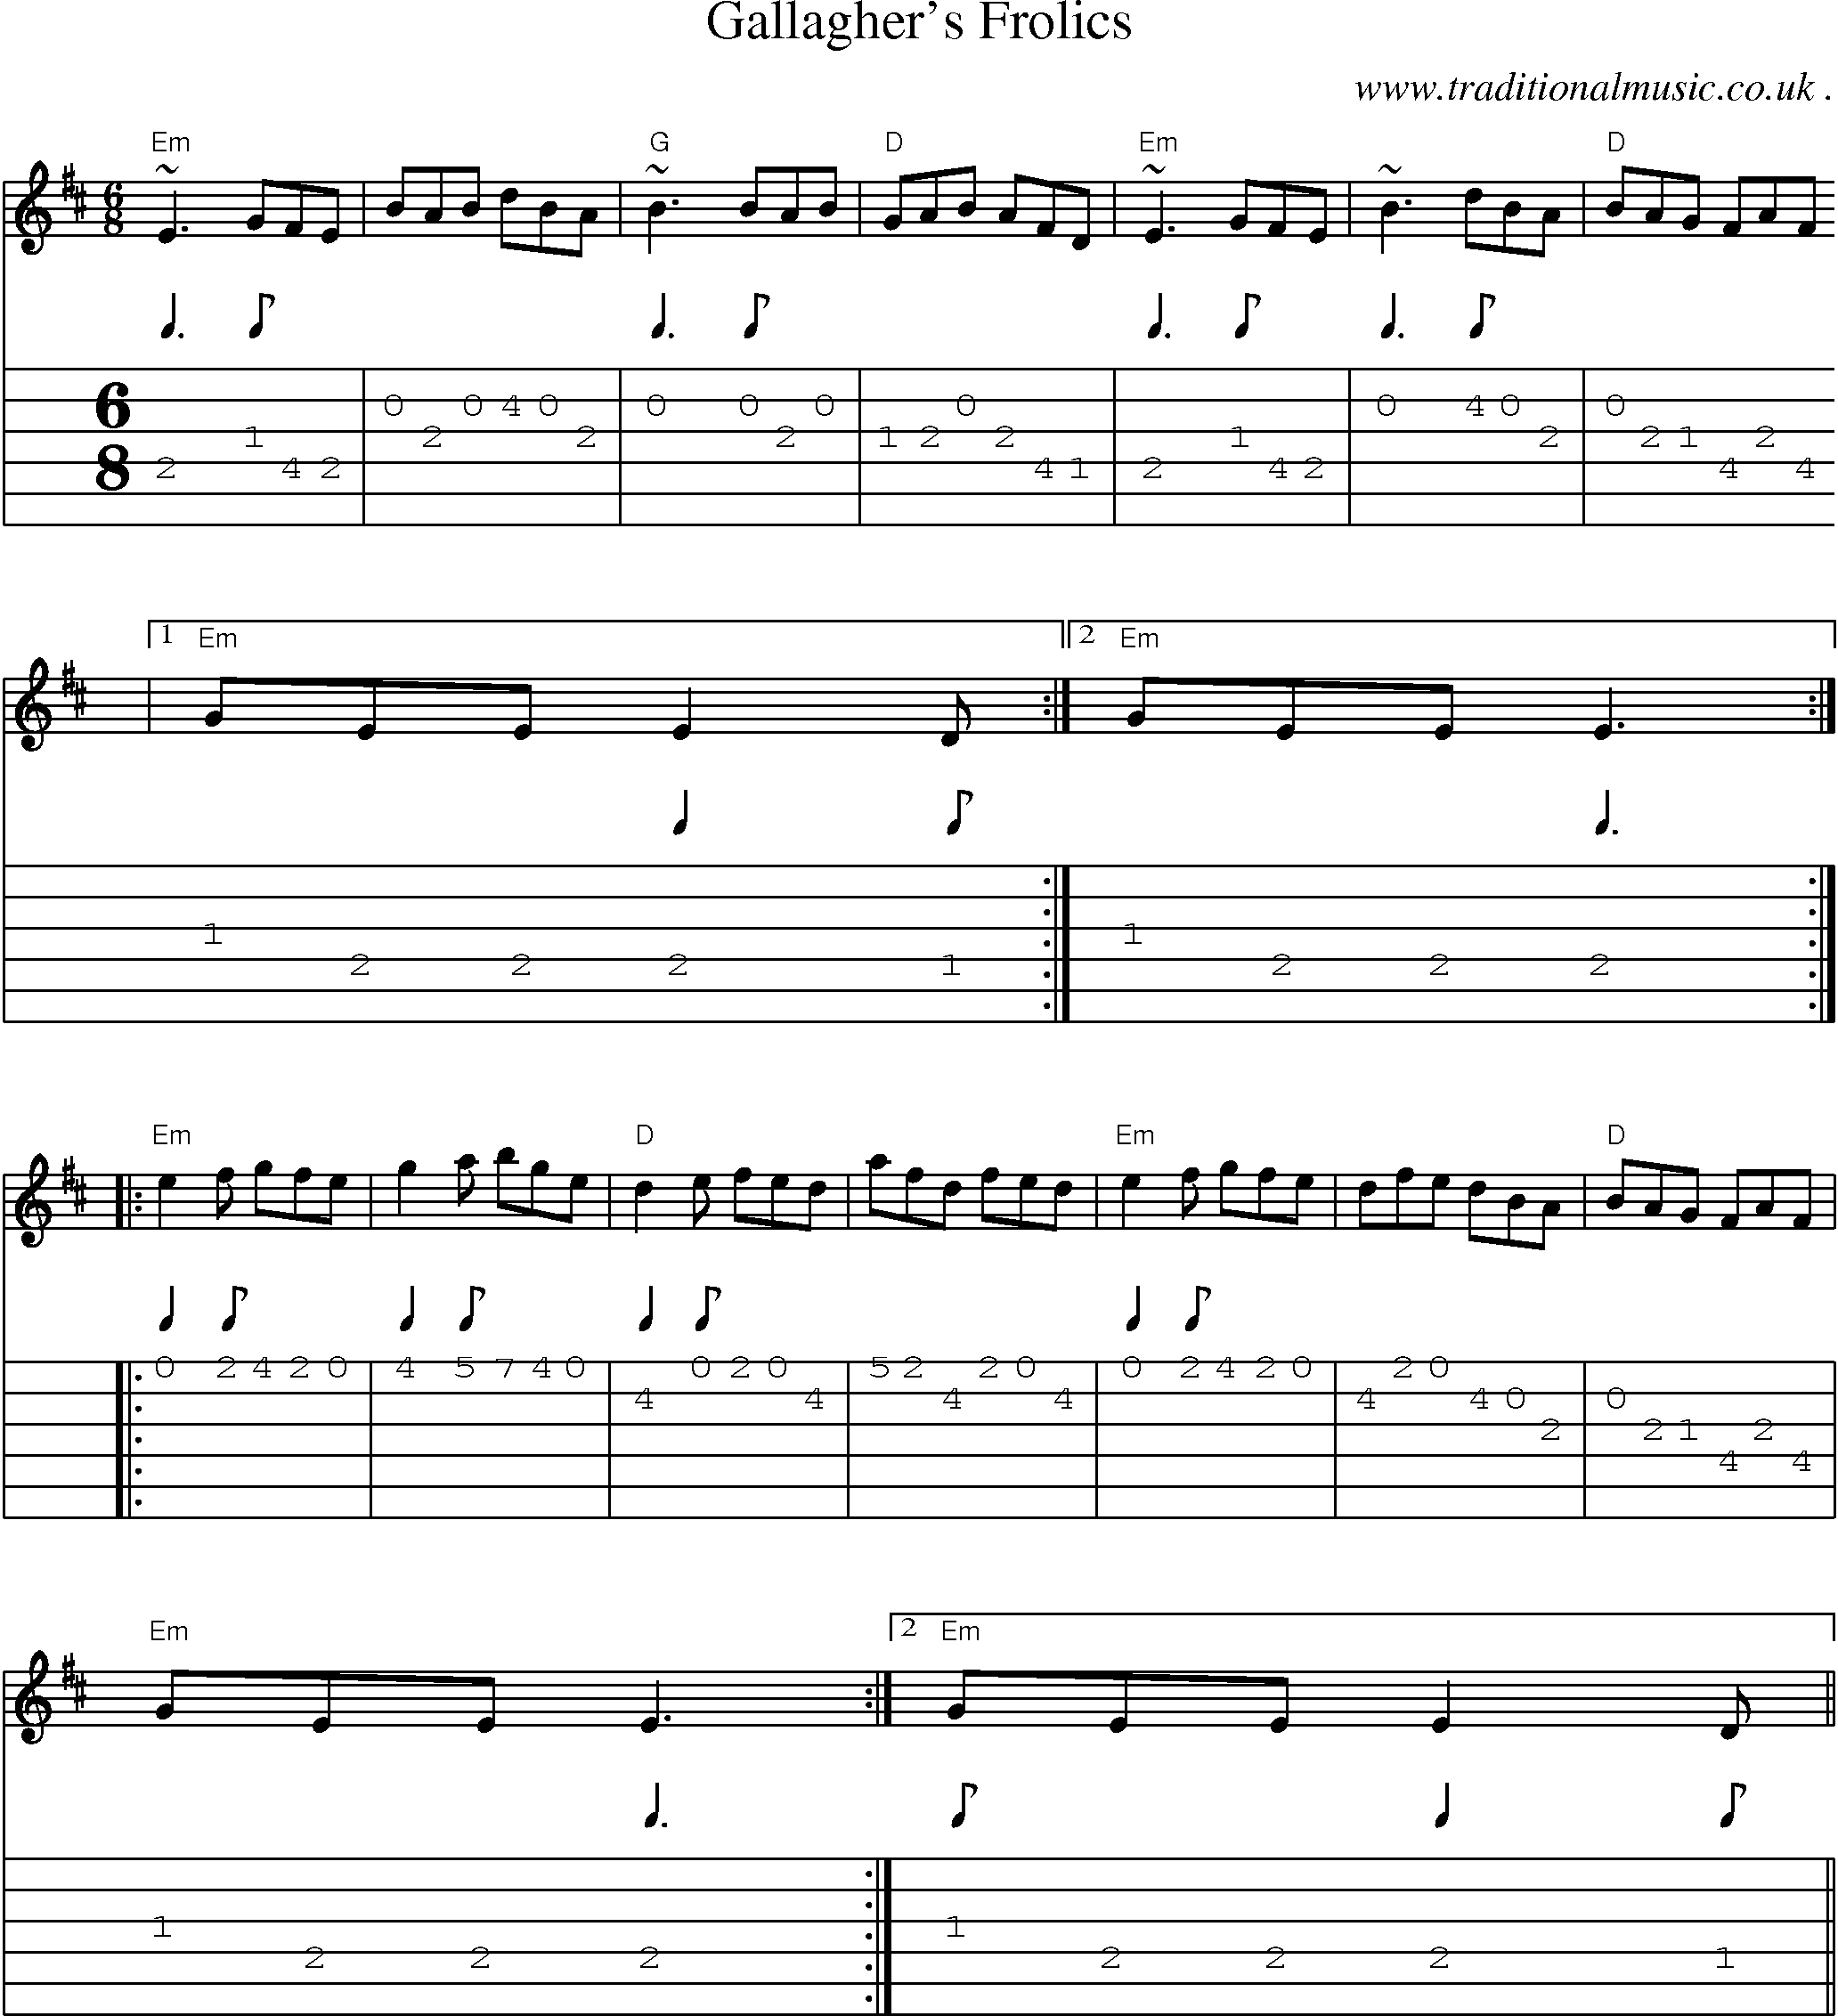 Music Score and Guitar Tabs for Gallaghers Frolics